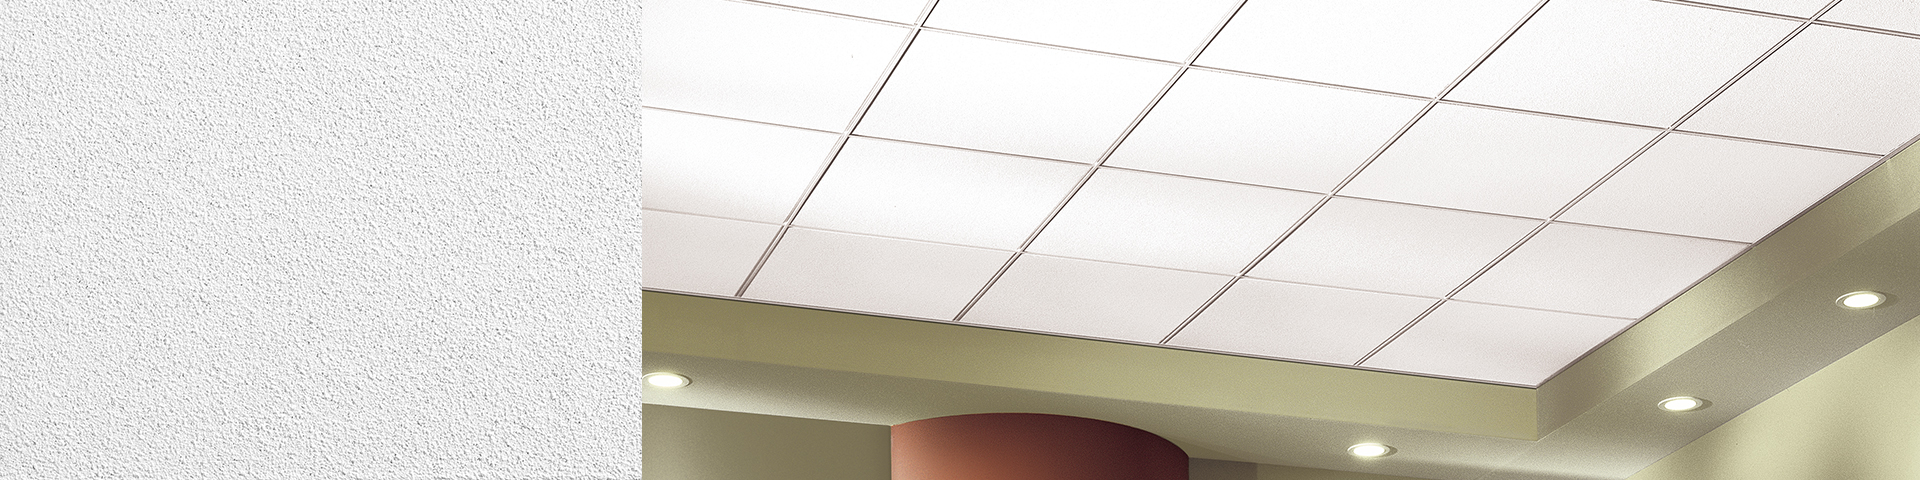 BP7701M Armstrong Ultima Plank 1800 x 300mm SL2 Edge Ceiling Tiles 